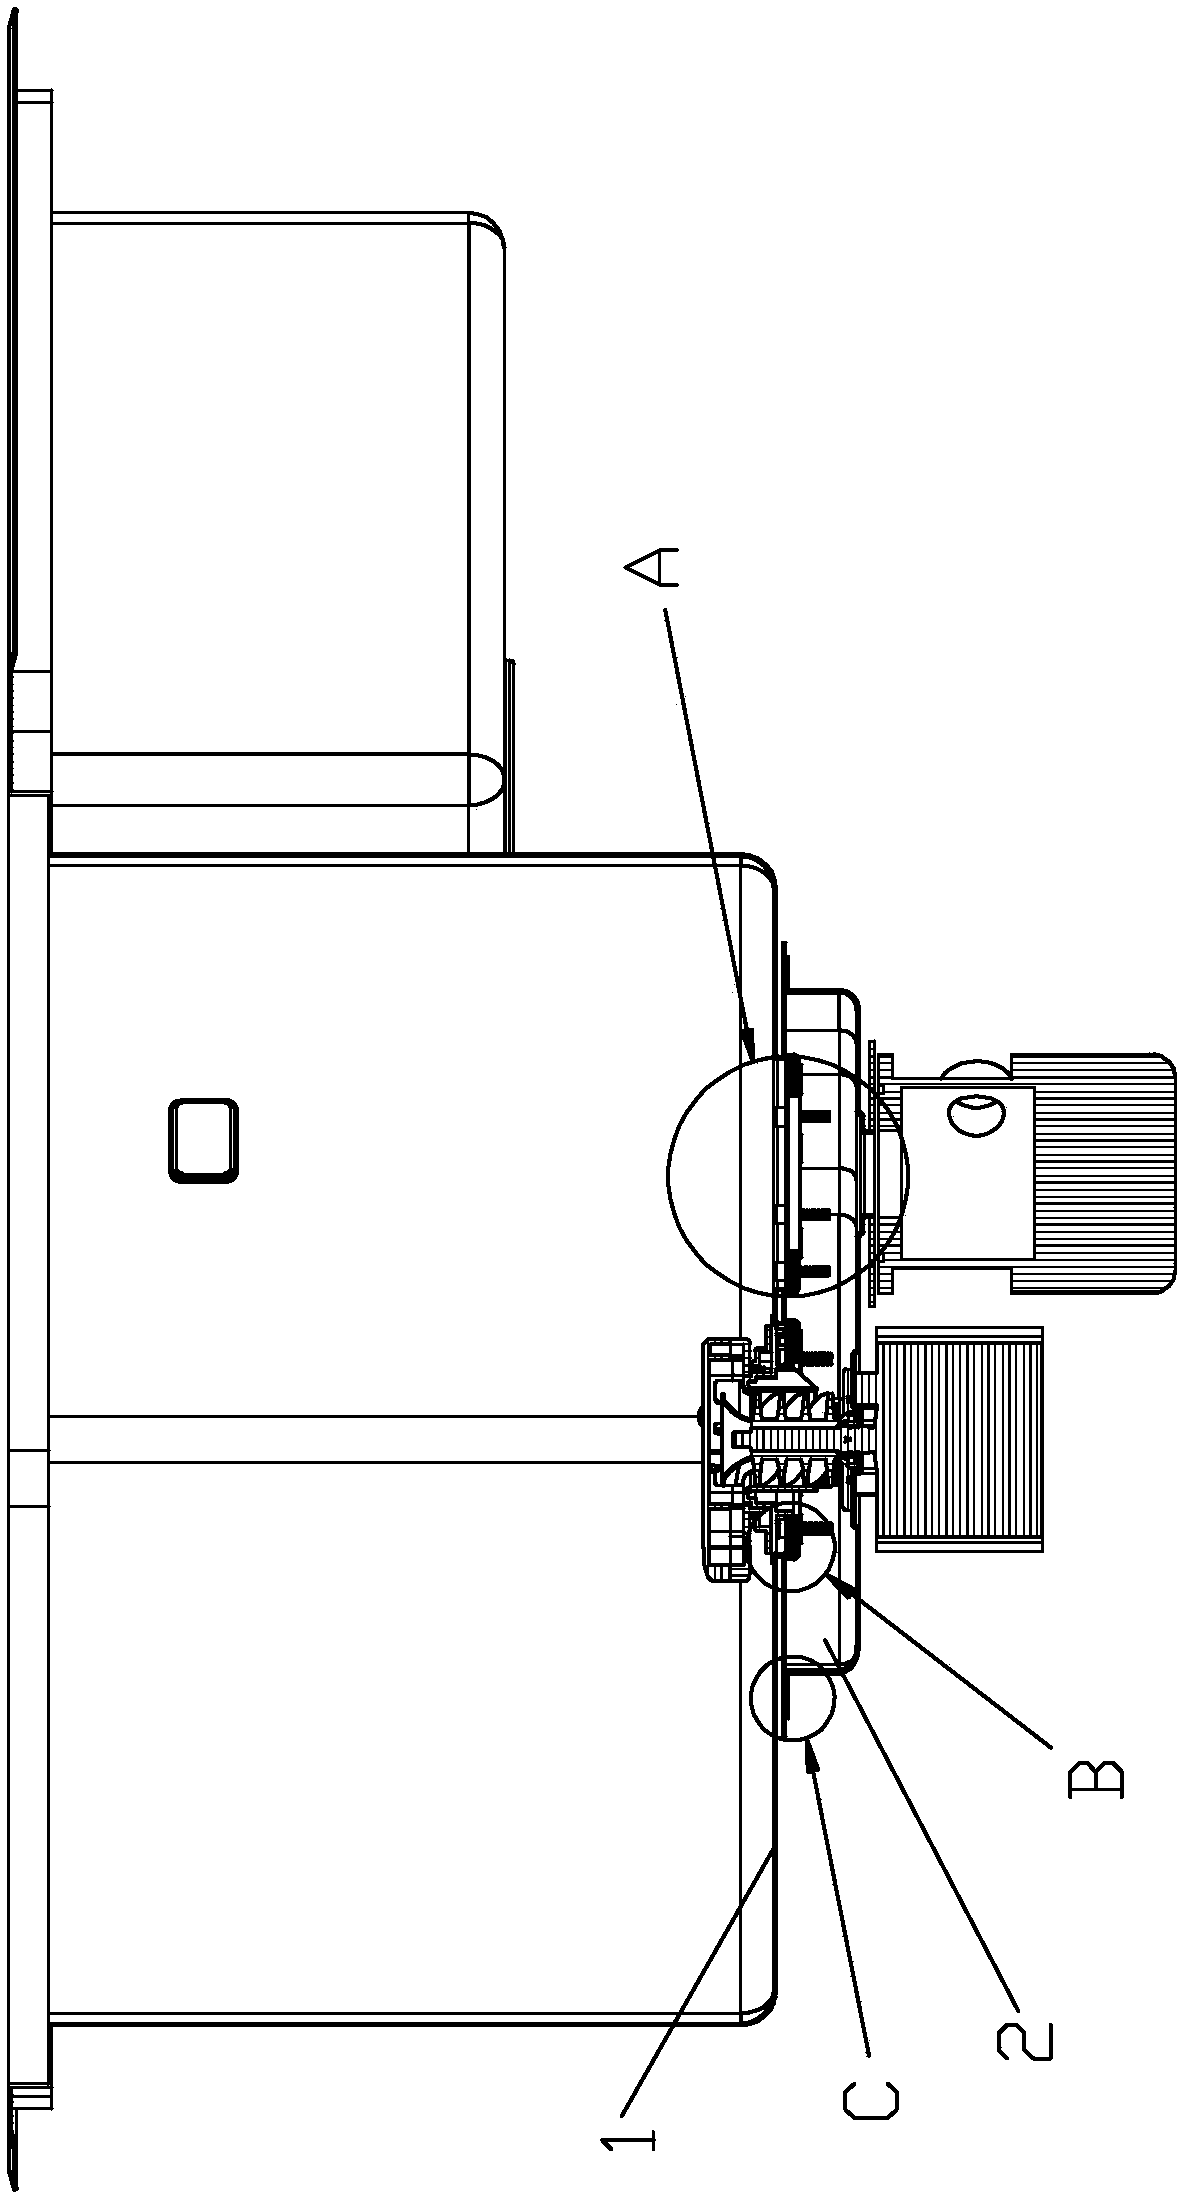 Water containing mechanism of water sink